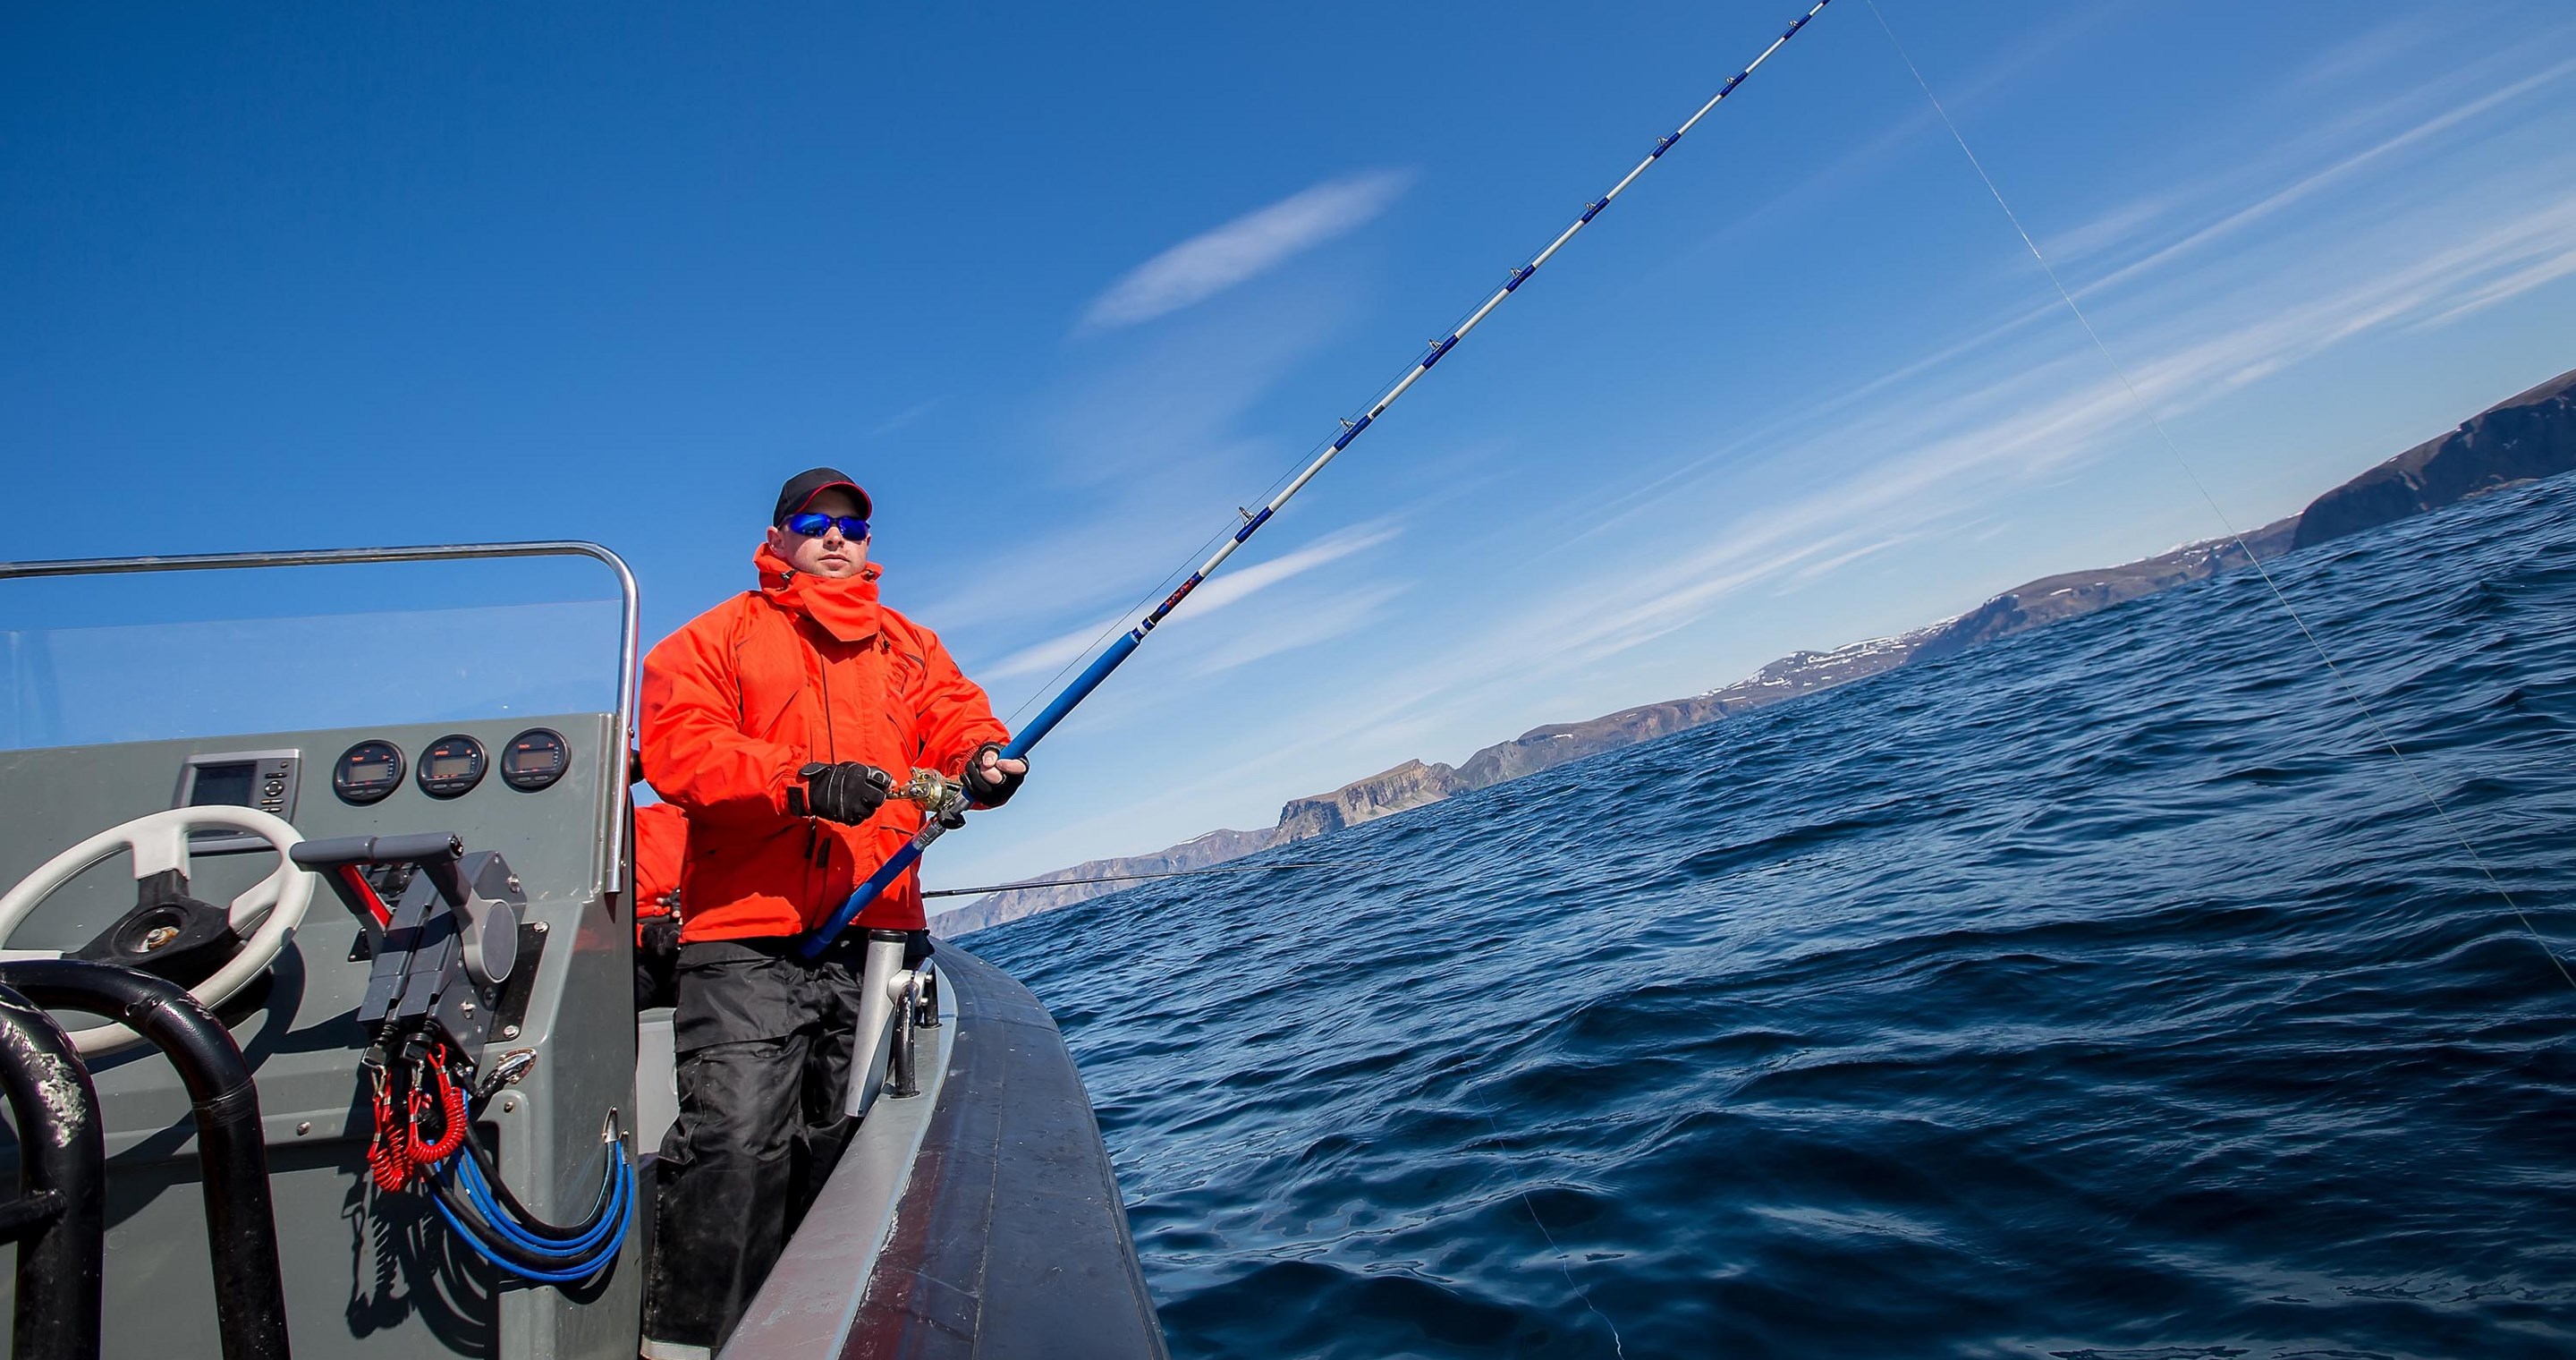 Freshwater Fishing vs Saltwater Fishing: Which One is for You?